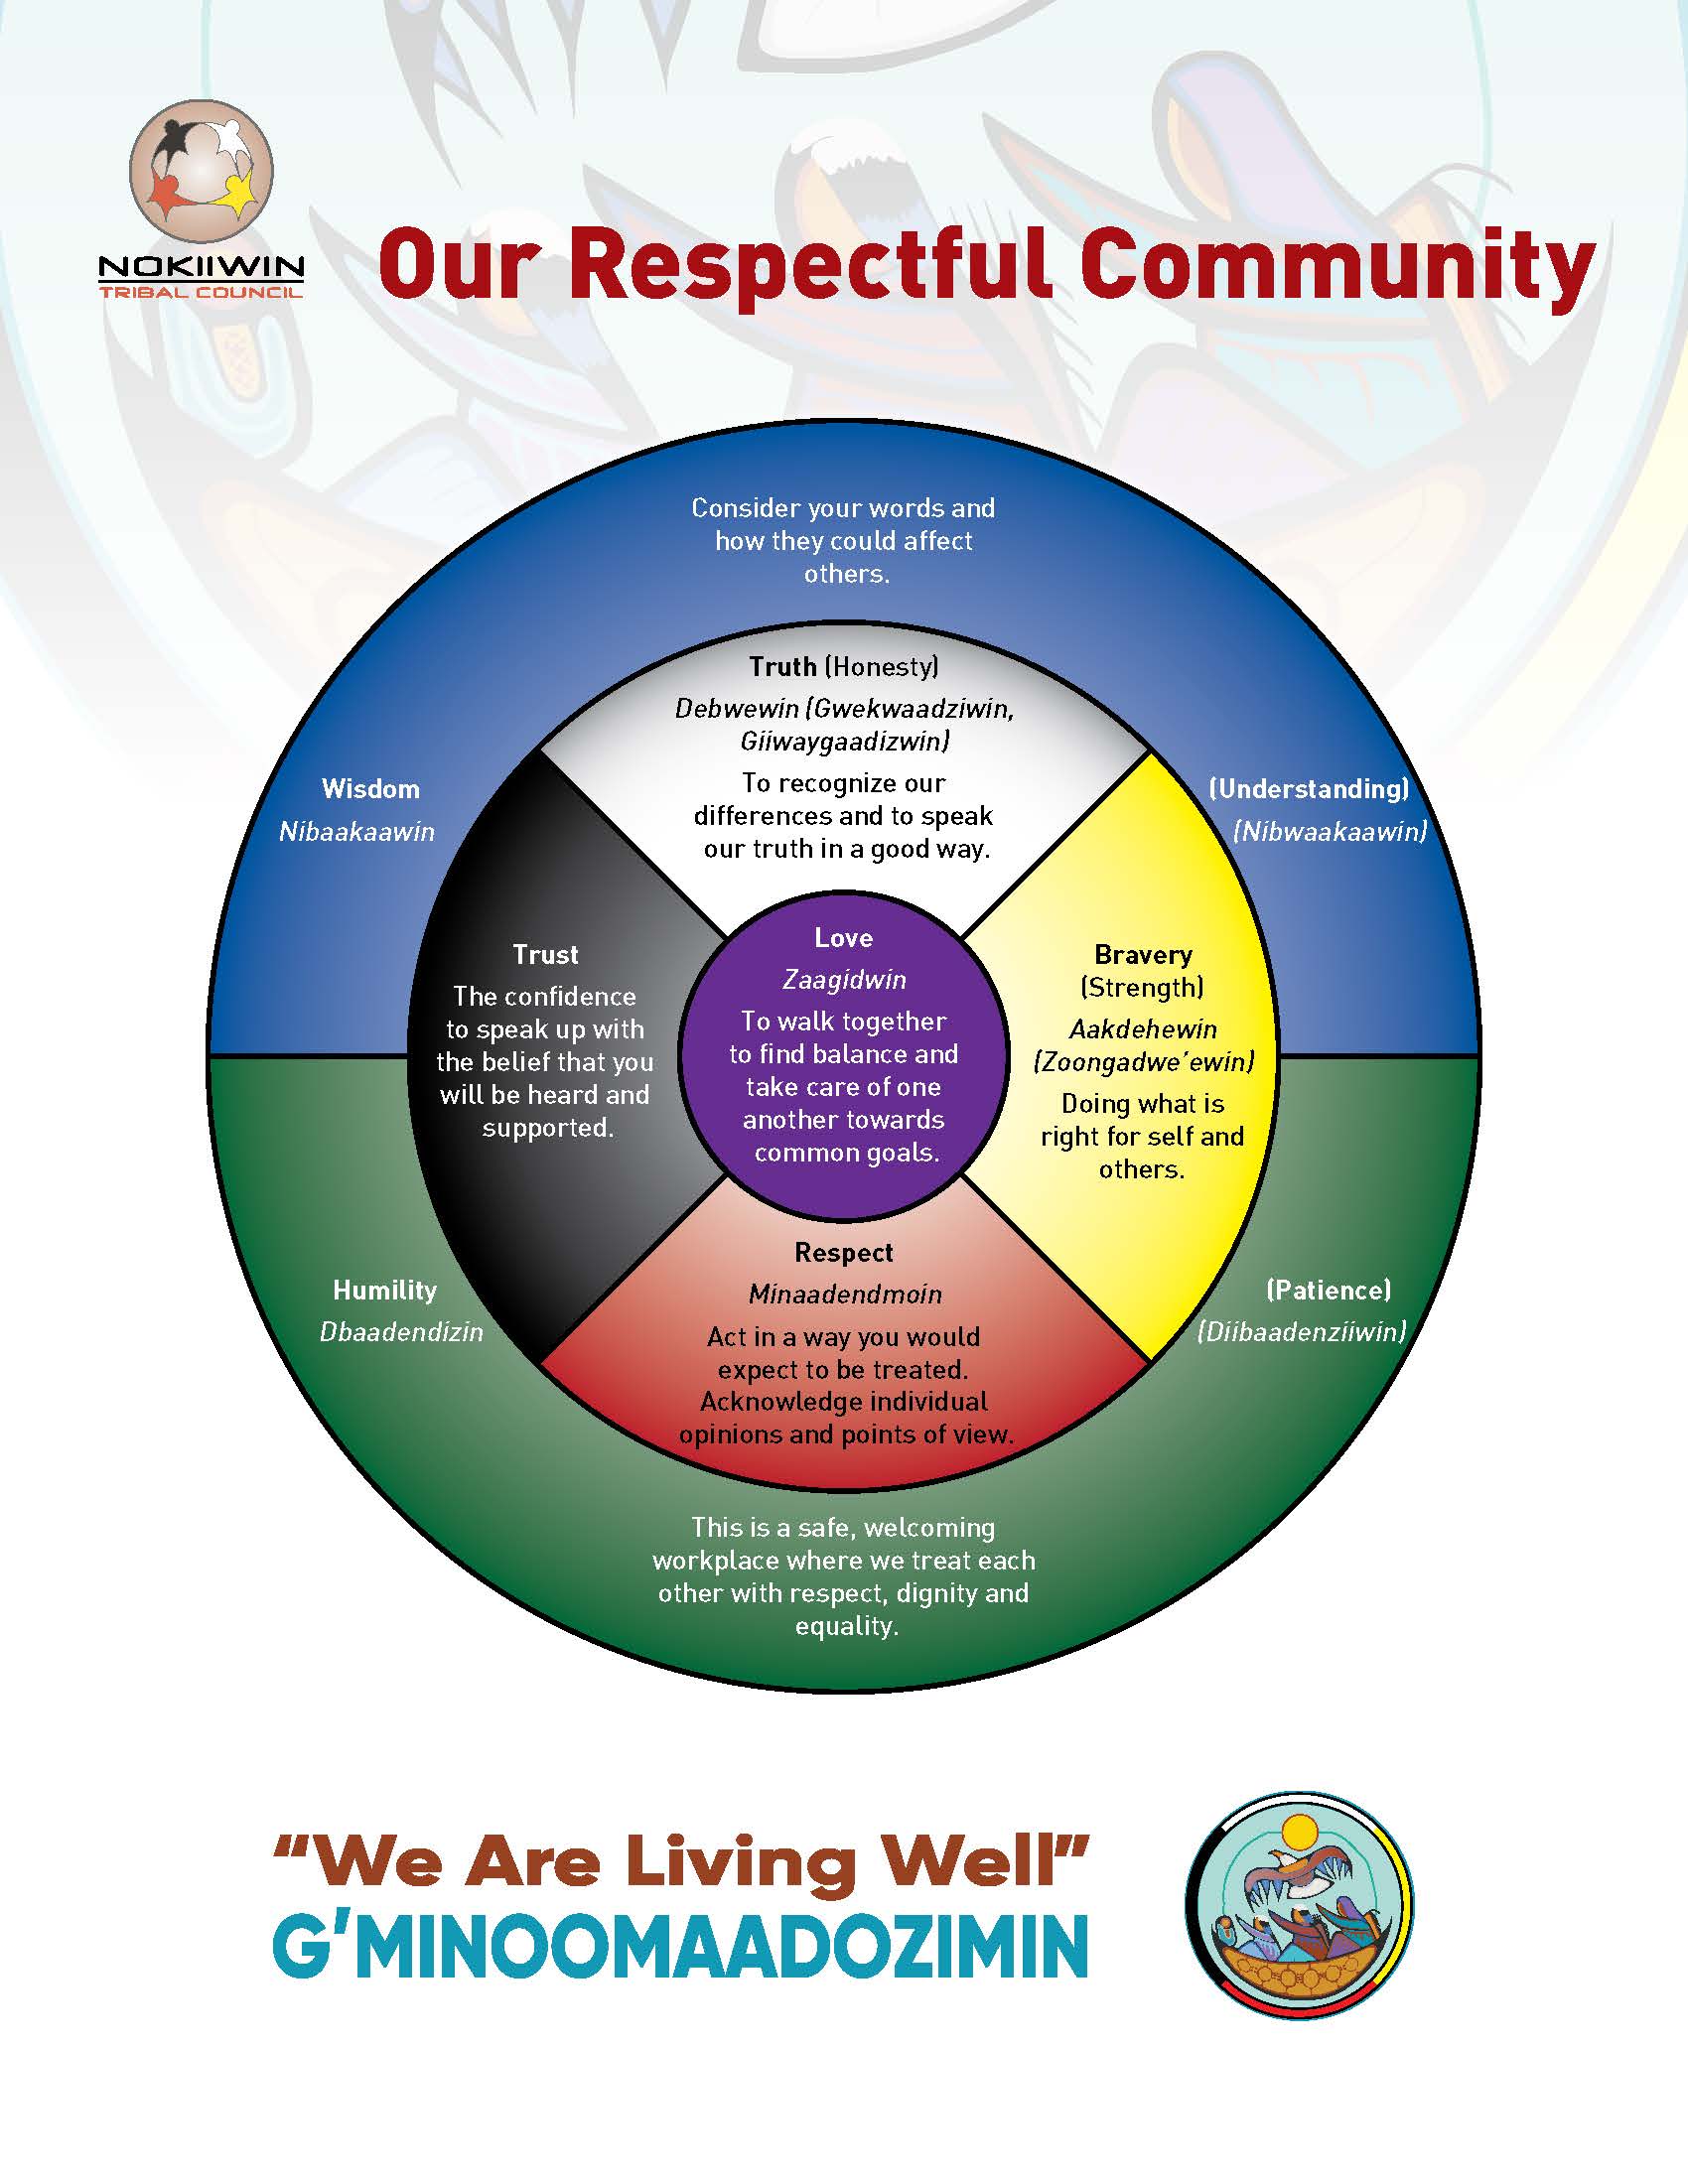 Our Respectful Community Circle